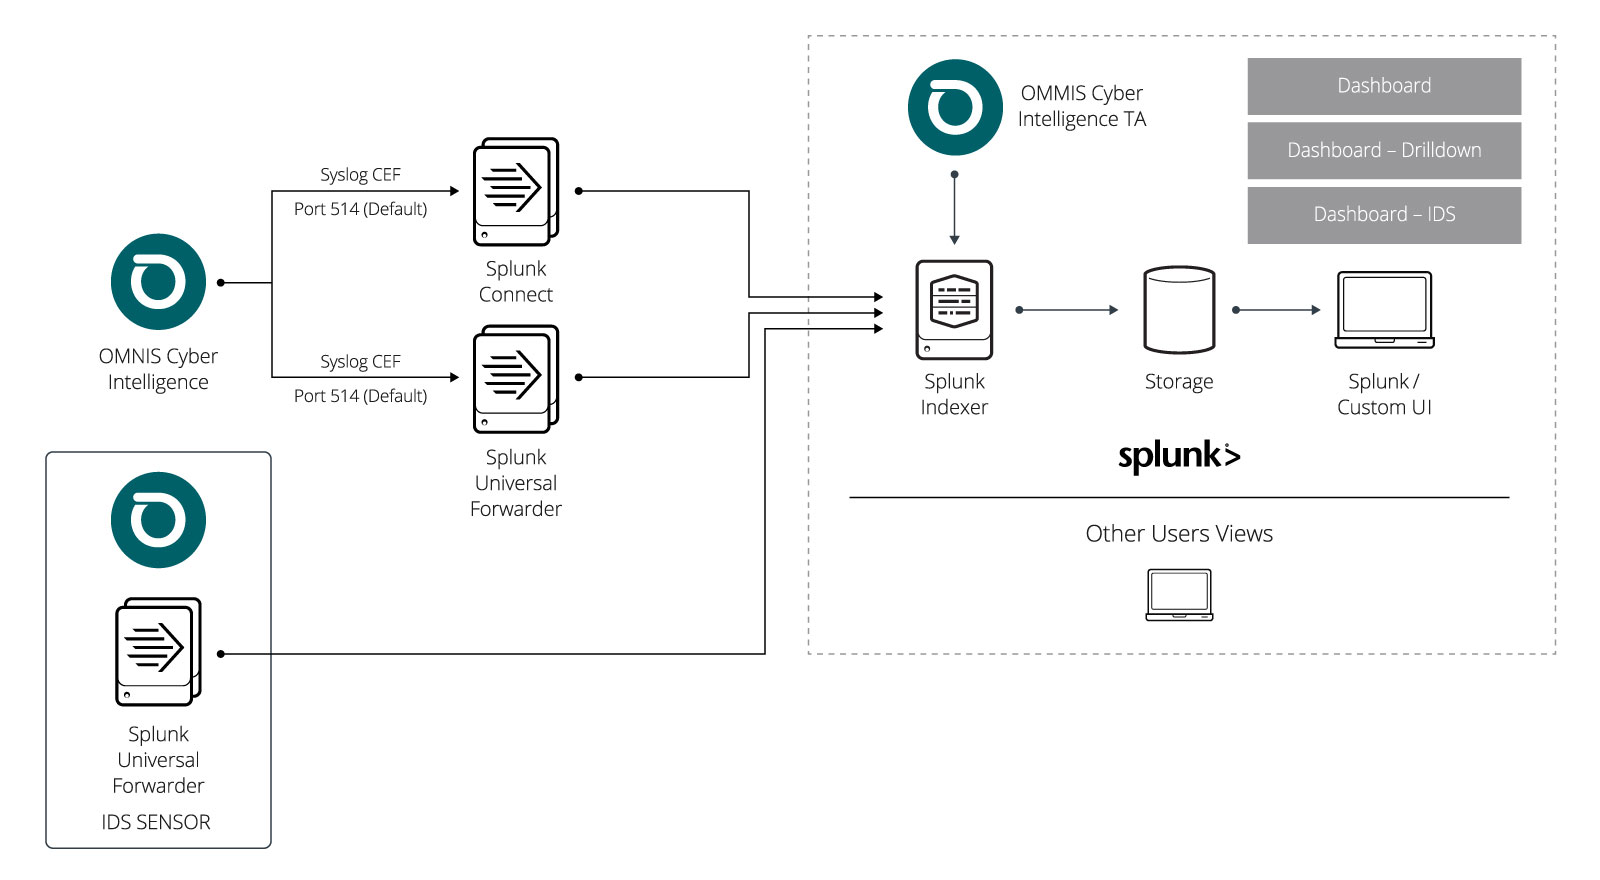 NETSCOUT Visibility and Advanced NDR App for Splunk Platform The NETSCOUT/Splunk Partnership: